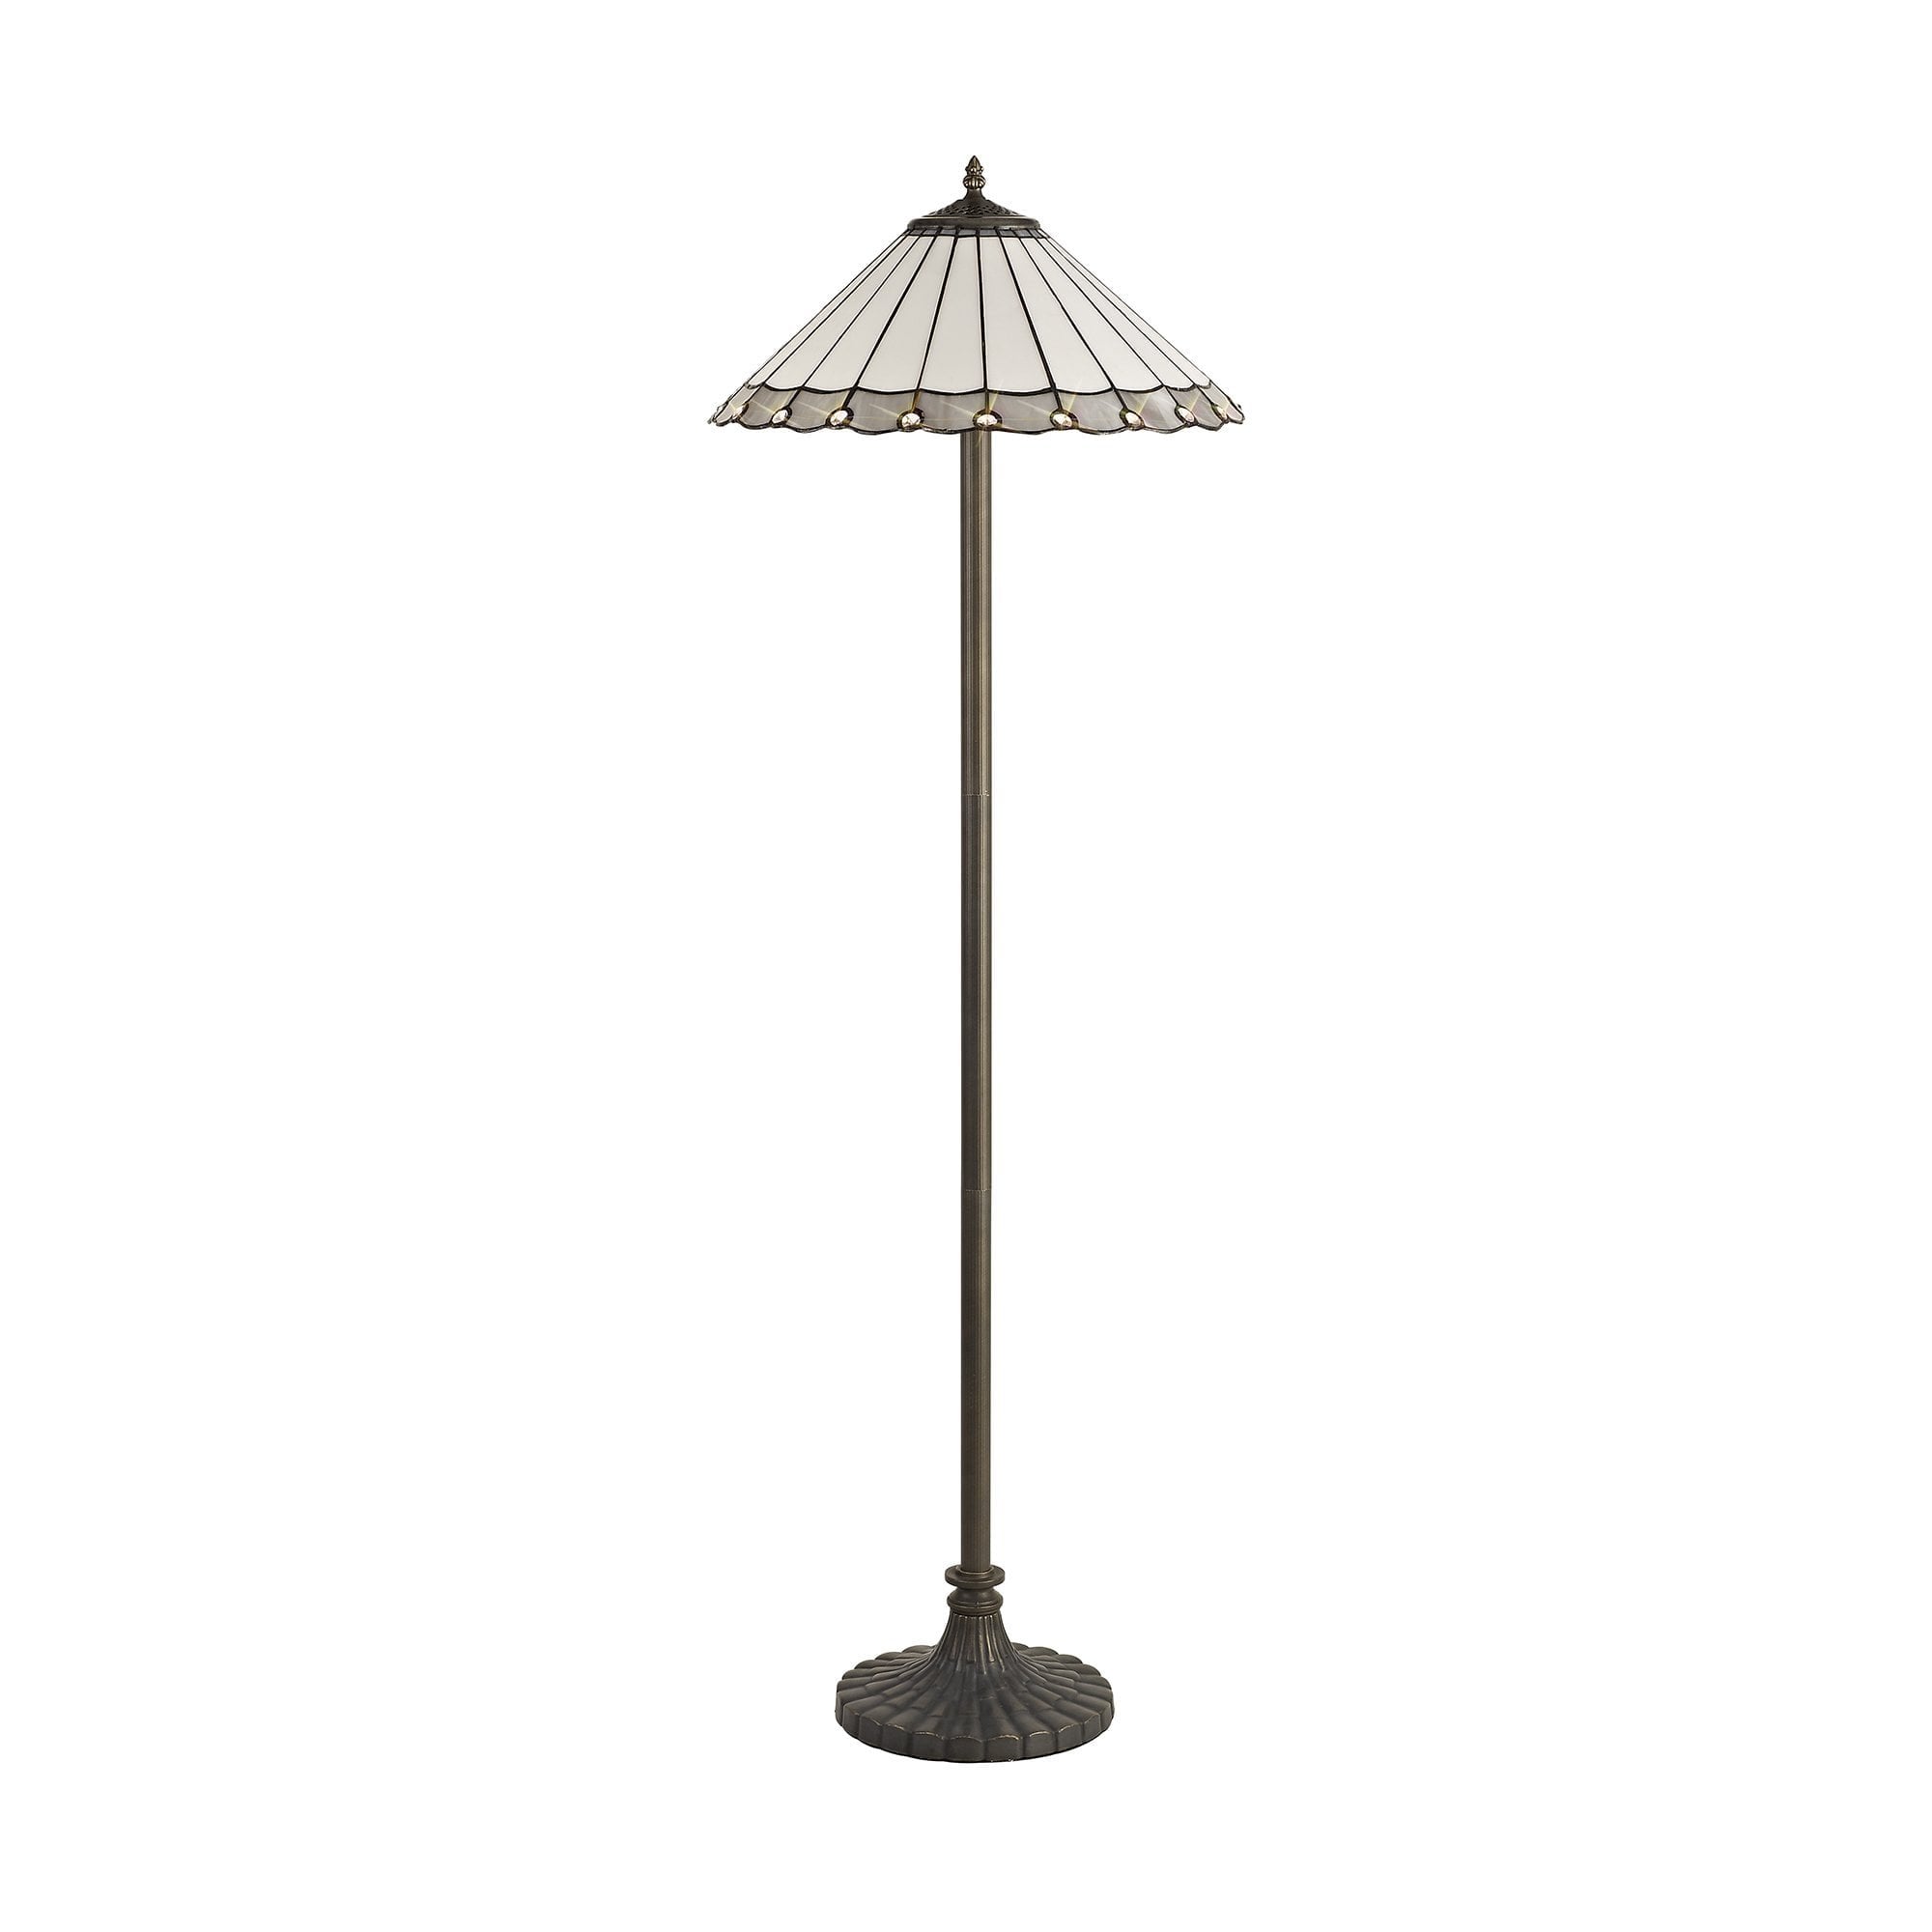 2 Light Stepped Design Floor Lamp E27 With 40cm Tiffany Shade, Grey/Cream/Crystal/Aged Antique Brass